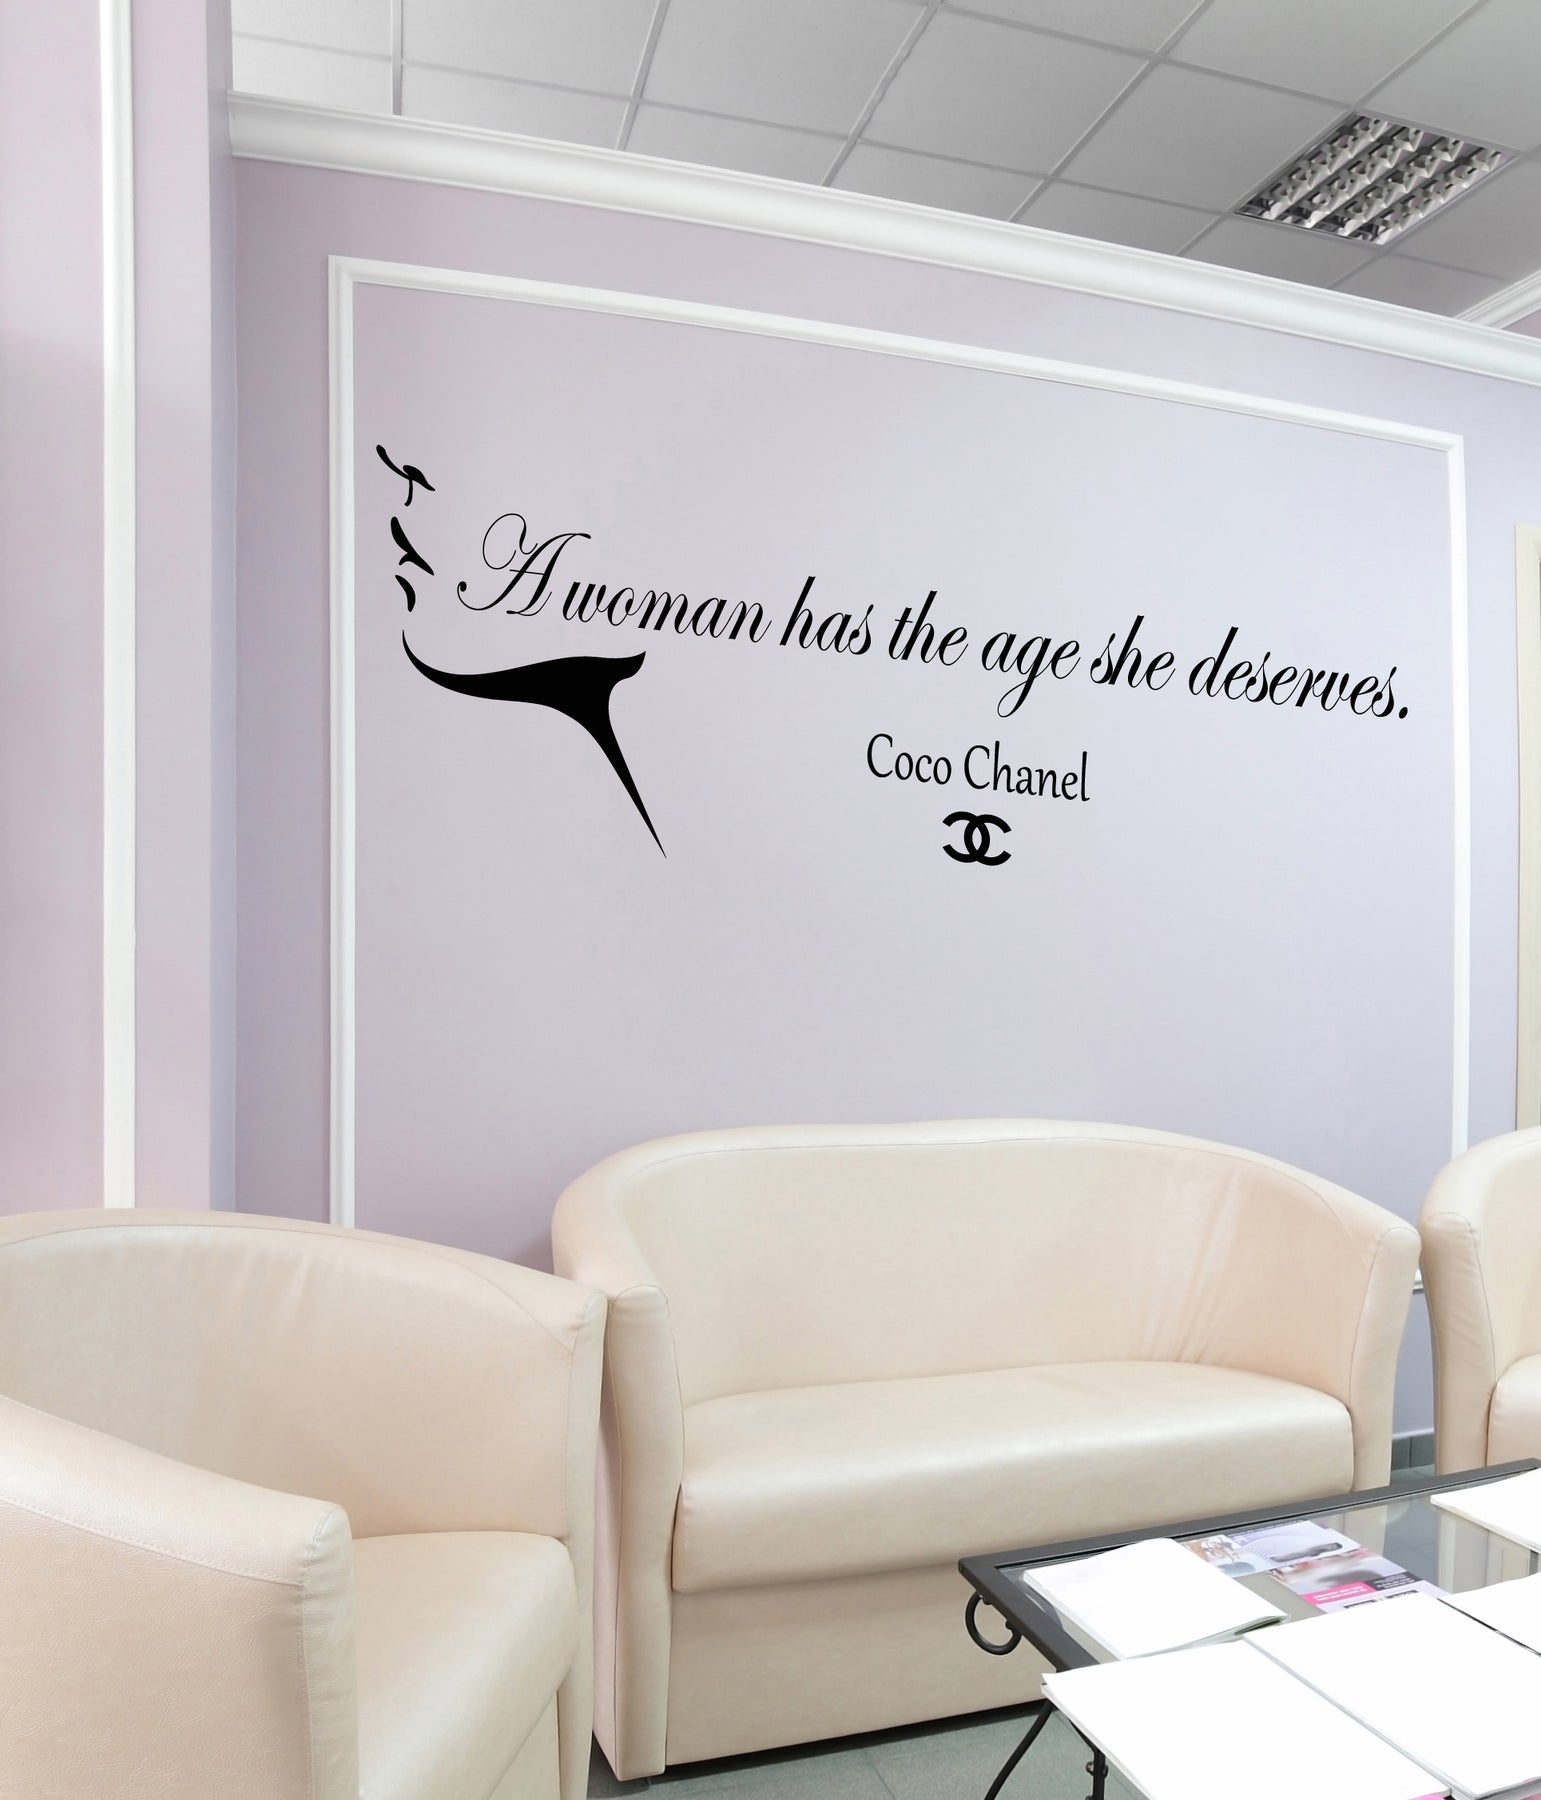 Be Different Chanel Motivation Quotes Vinyl Wall Art Stickers Home